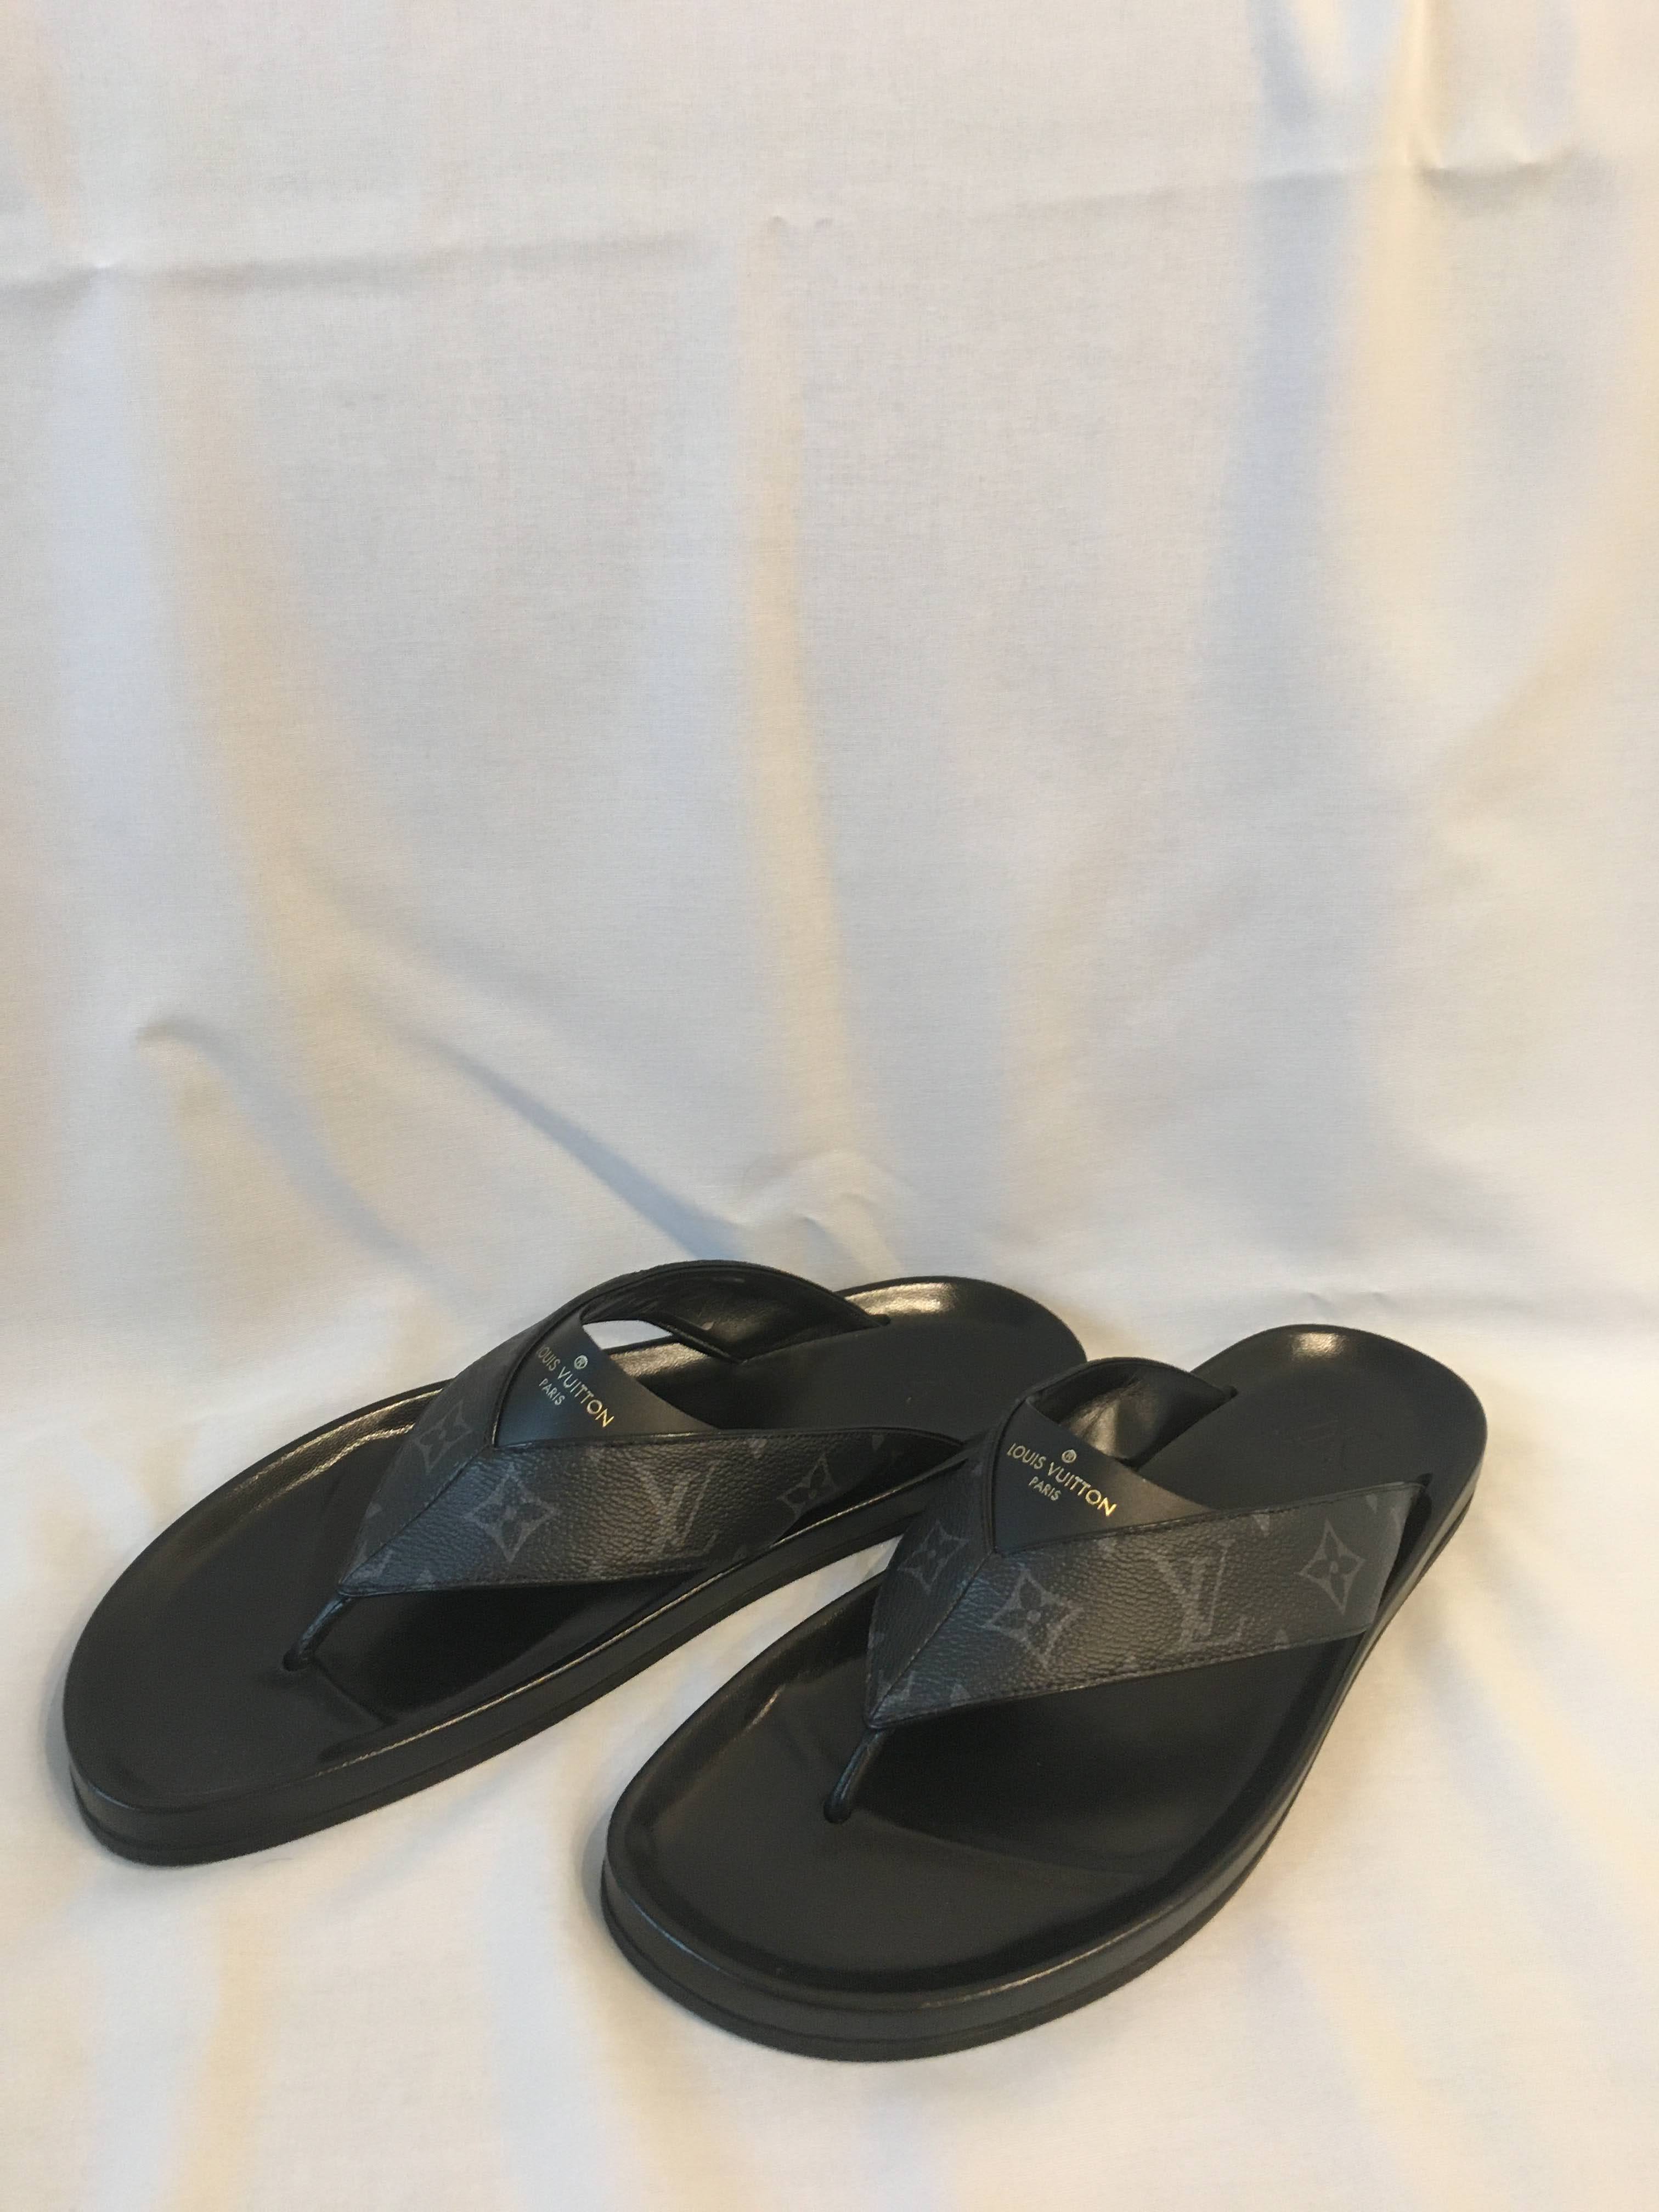 Louis Vuitton Mirabeau Thong Sandals In Black And Grey - Praise To